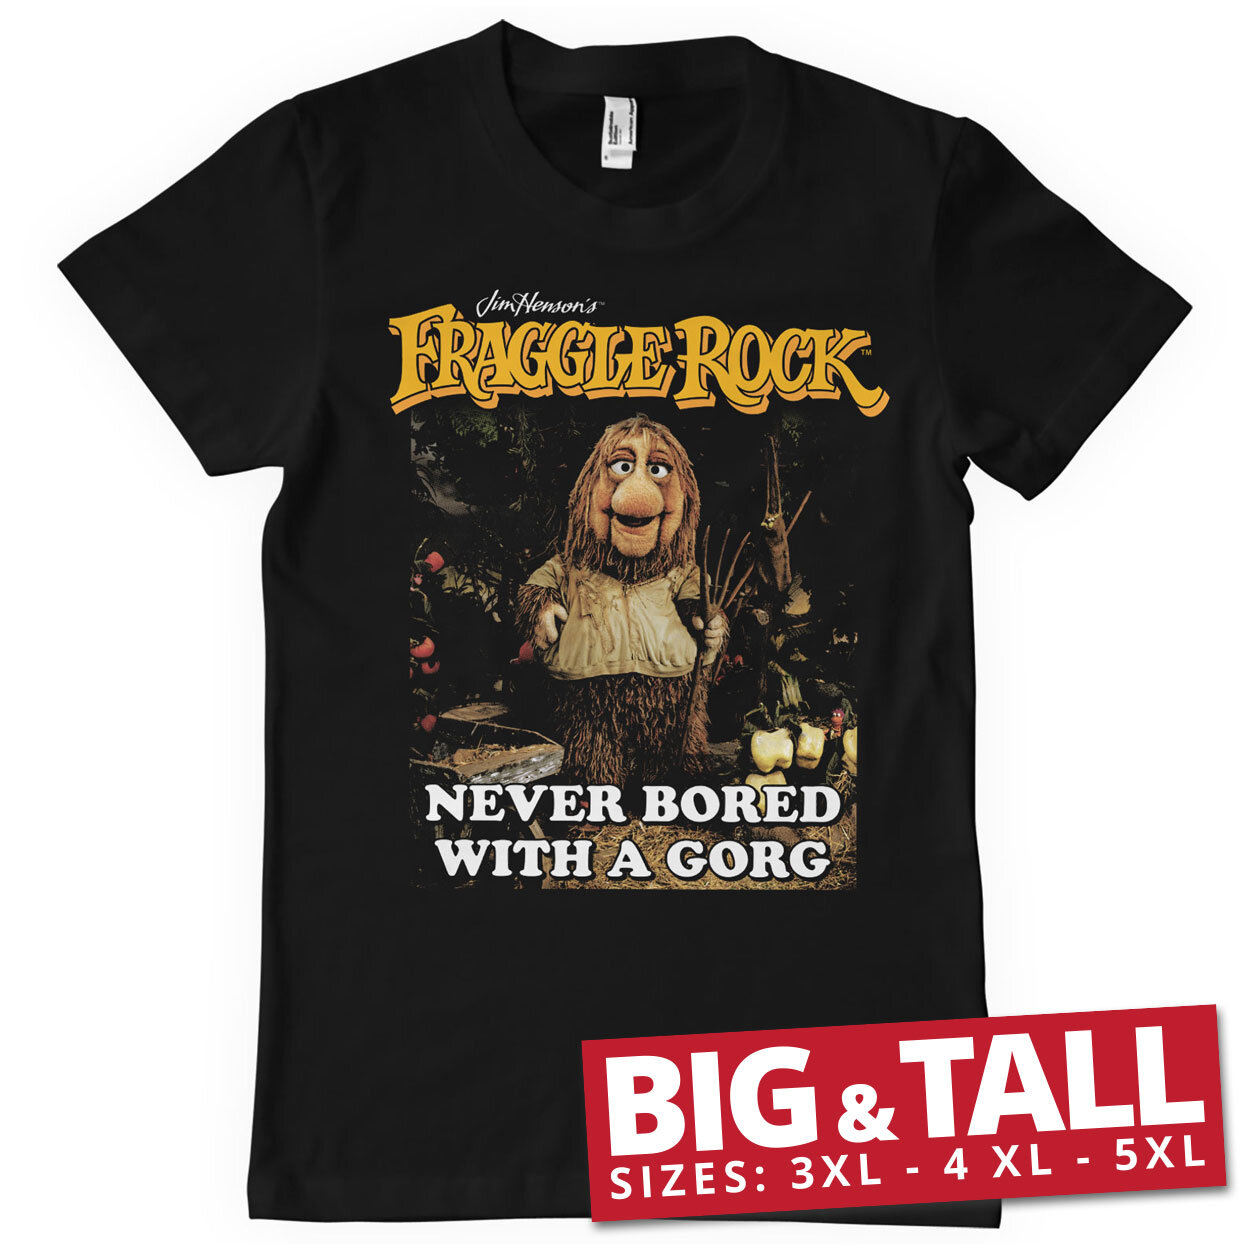 Never Bored With A Gorg Big & Tall T-Shirt